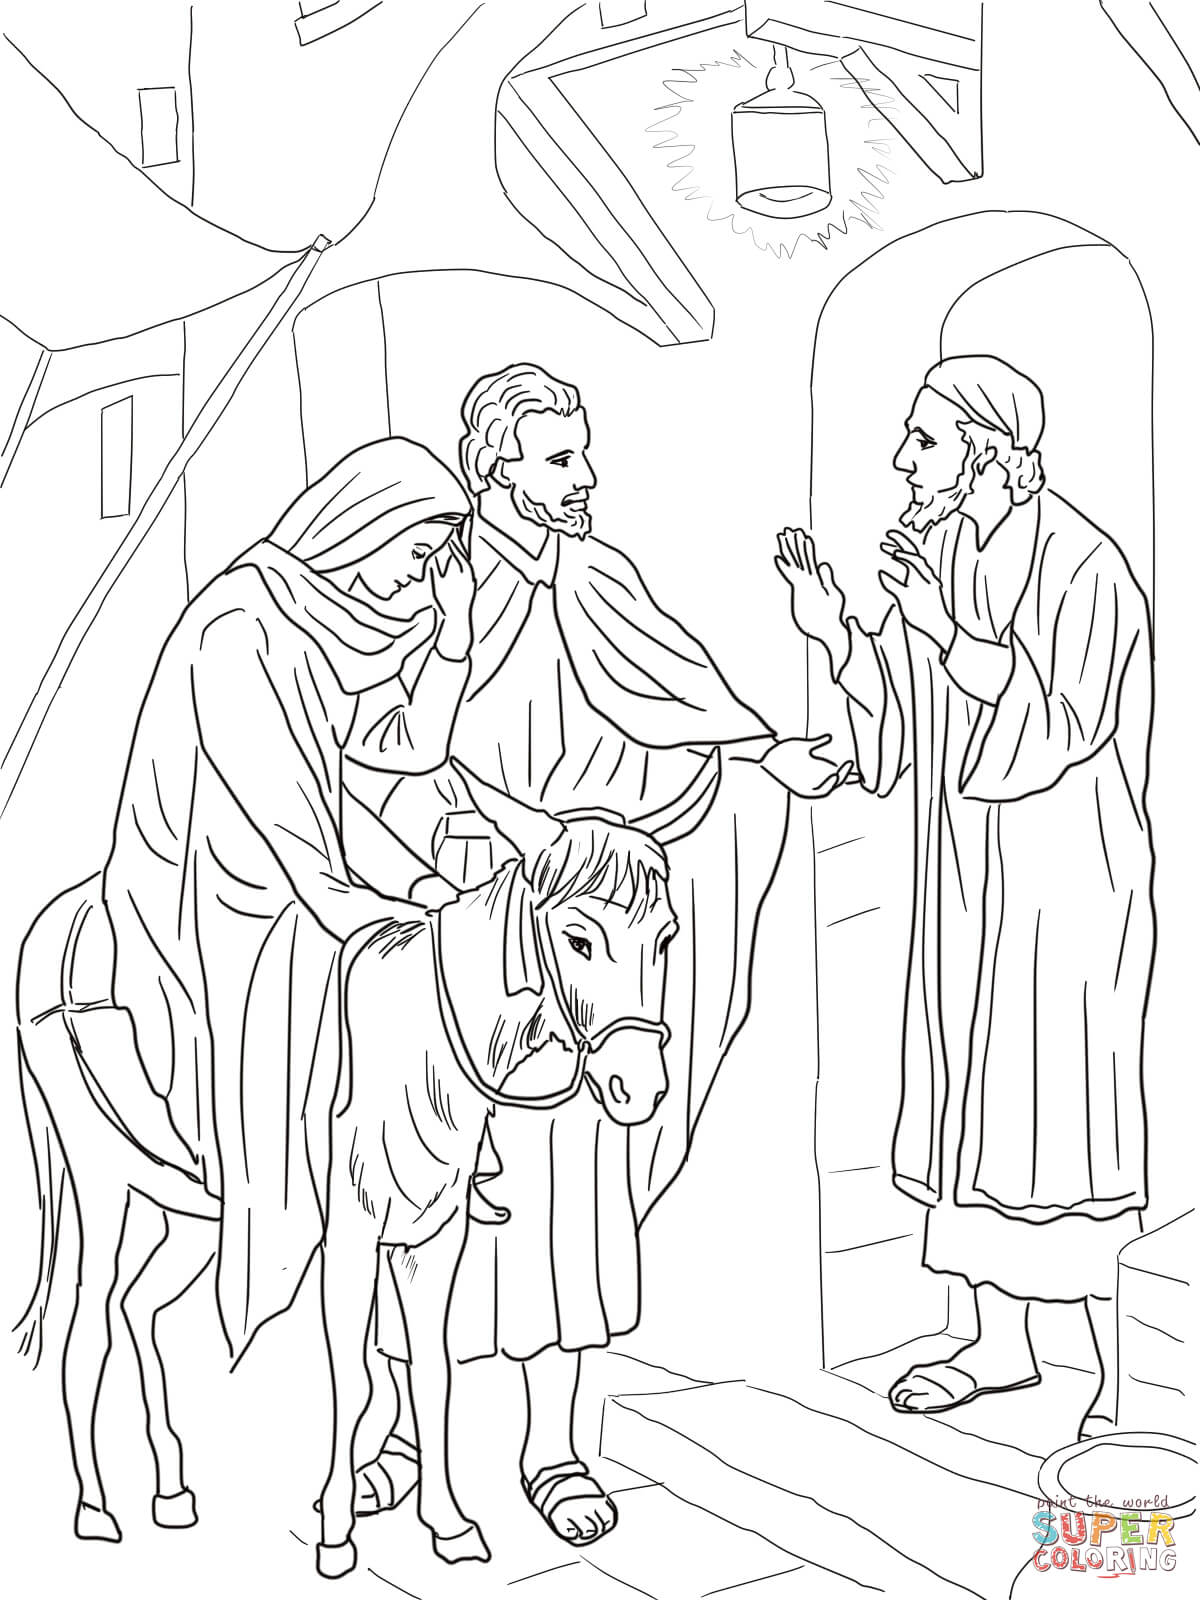 No room at the inn for mary and joseph coloring page free printable coloring pages